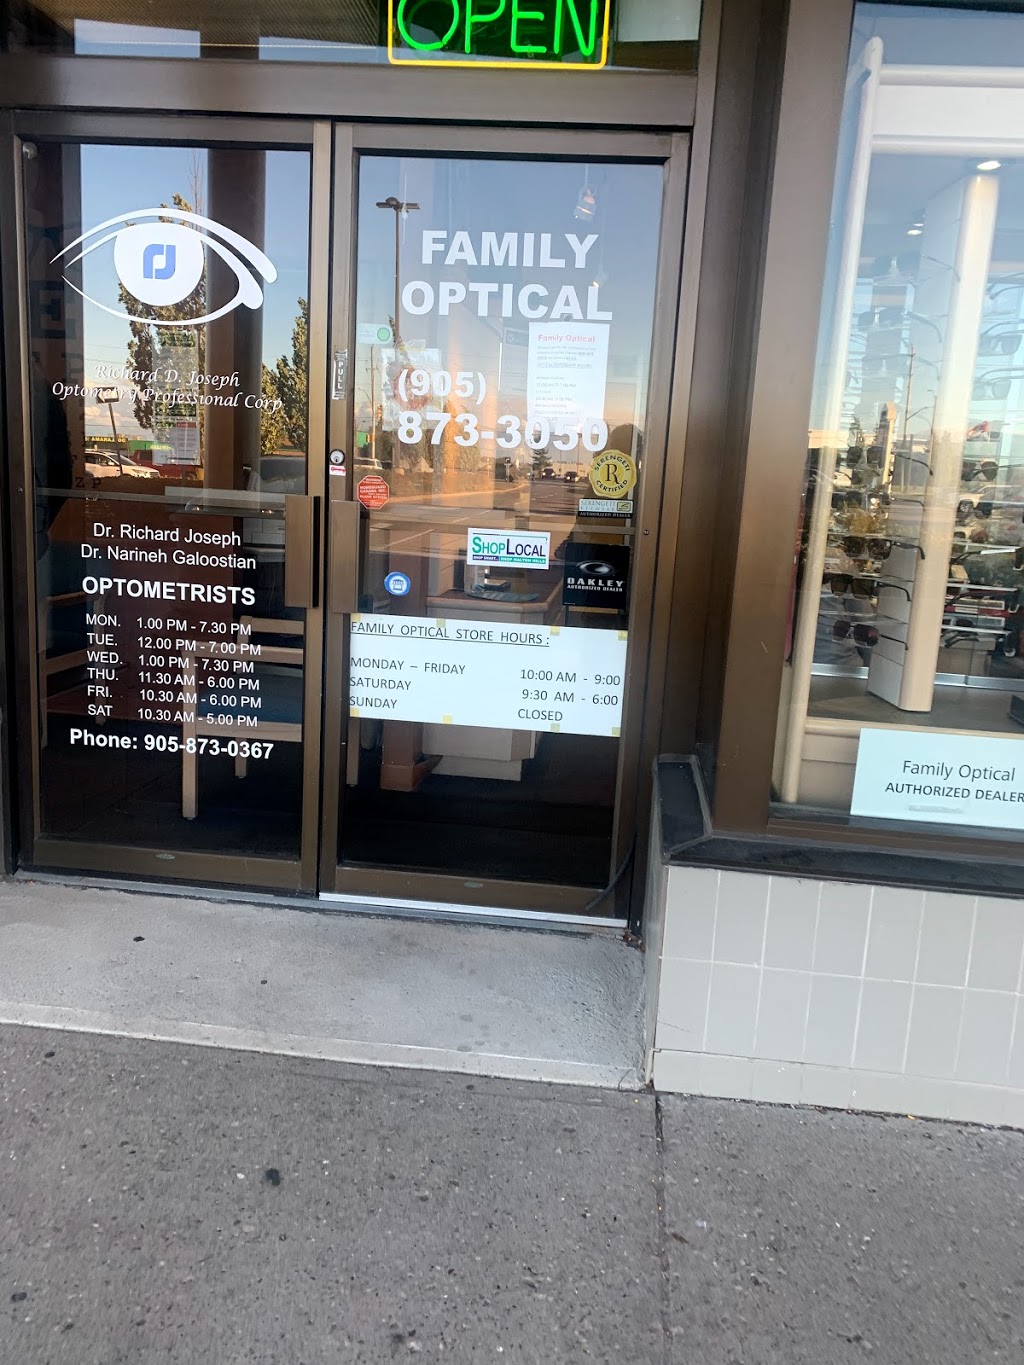 Family Optical | 280 Guelph St #18, Georgetown, ON L7G 4B1, Canada | Phone: (905) 873-3050